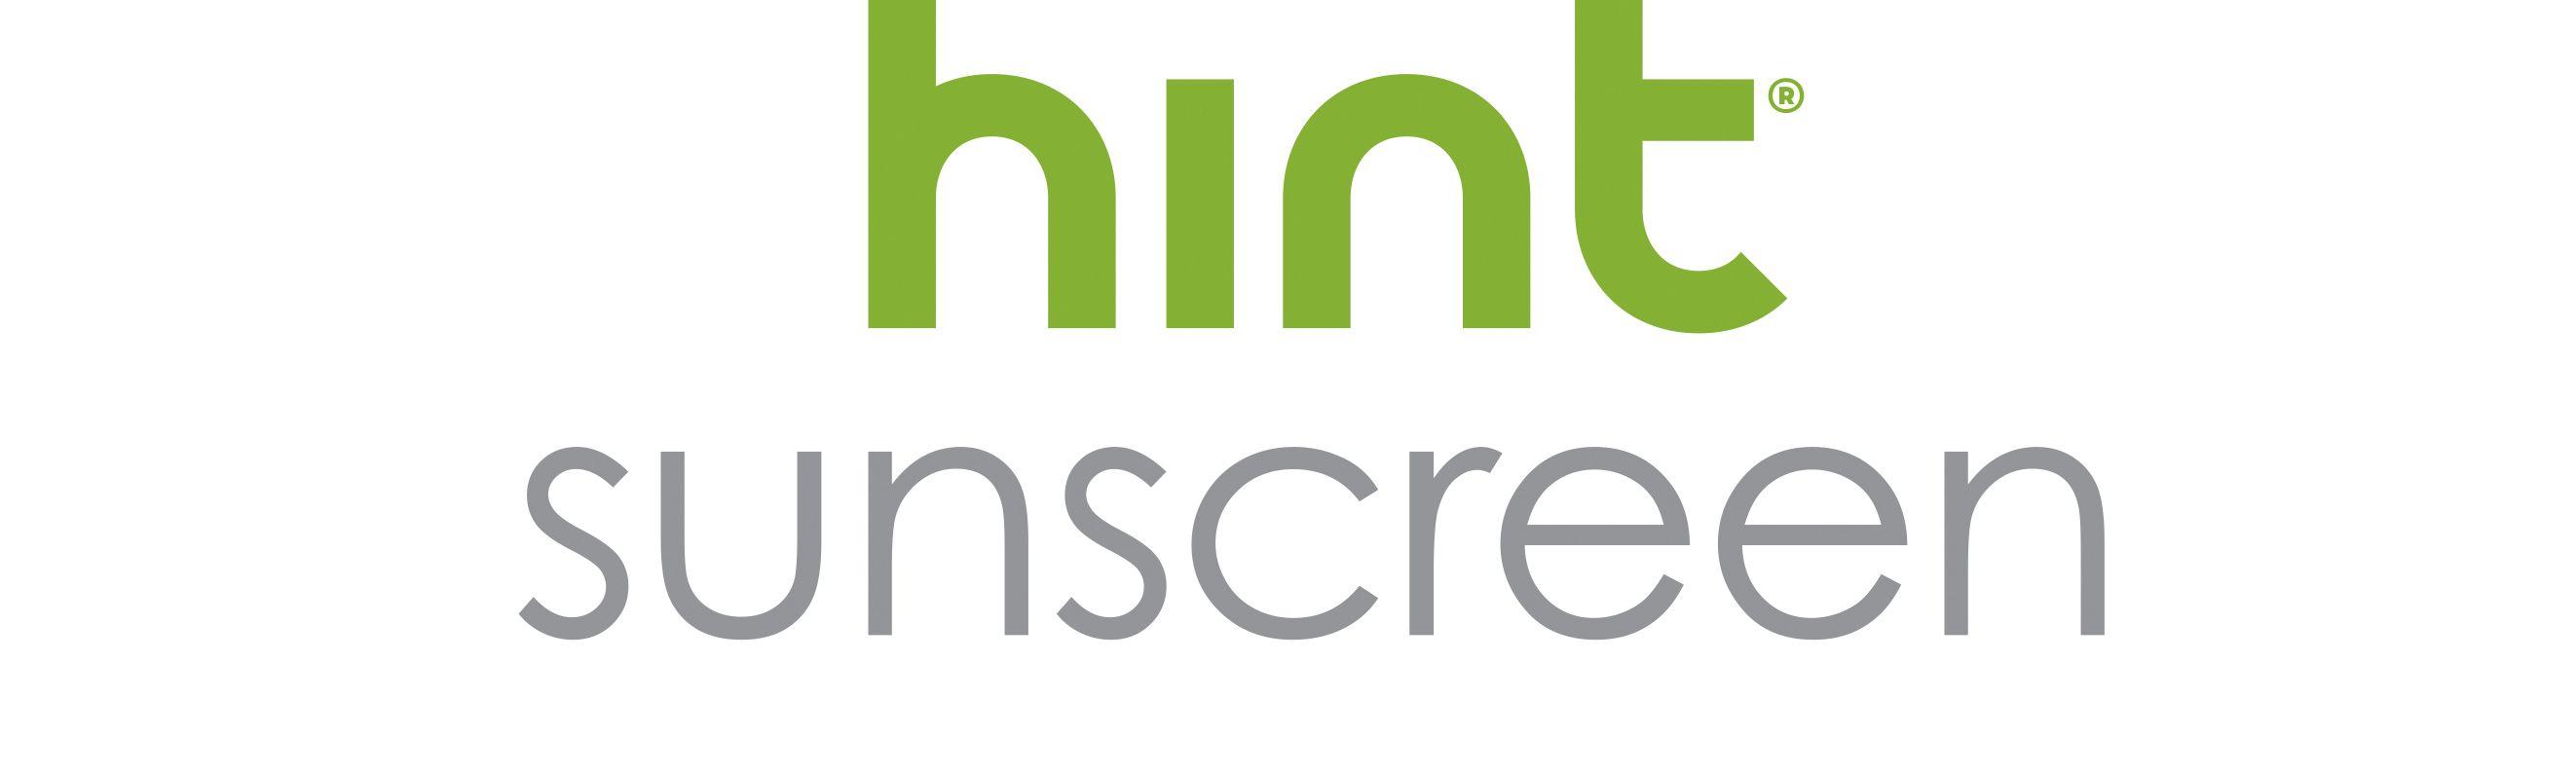 Hint Logo - hint® Fruit Infused Sunscreen Spray Now Available Nationwide ...